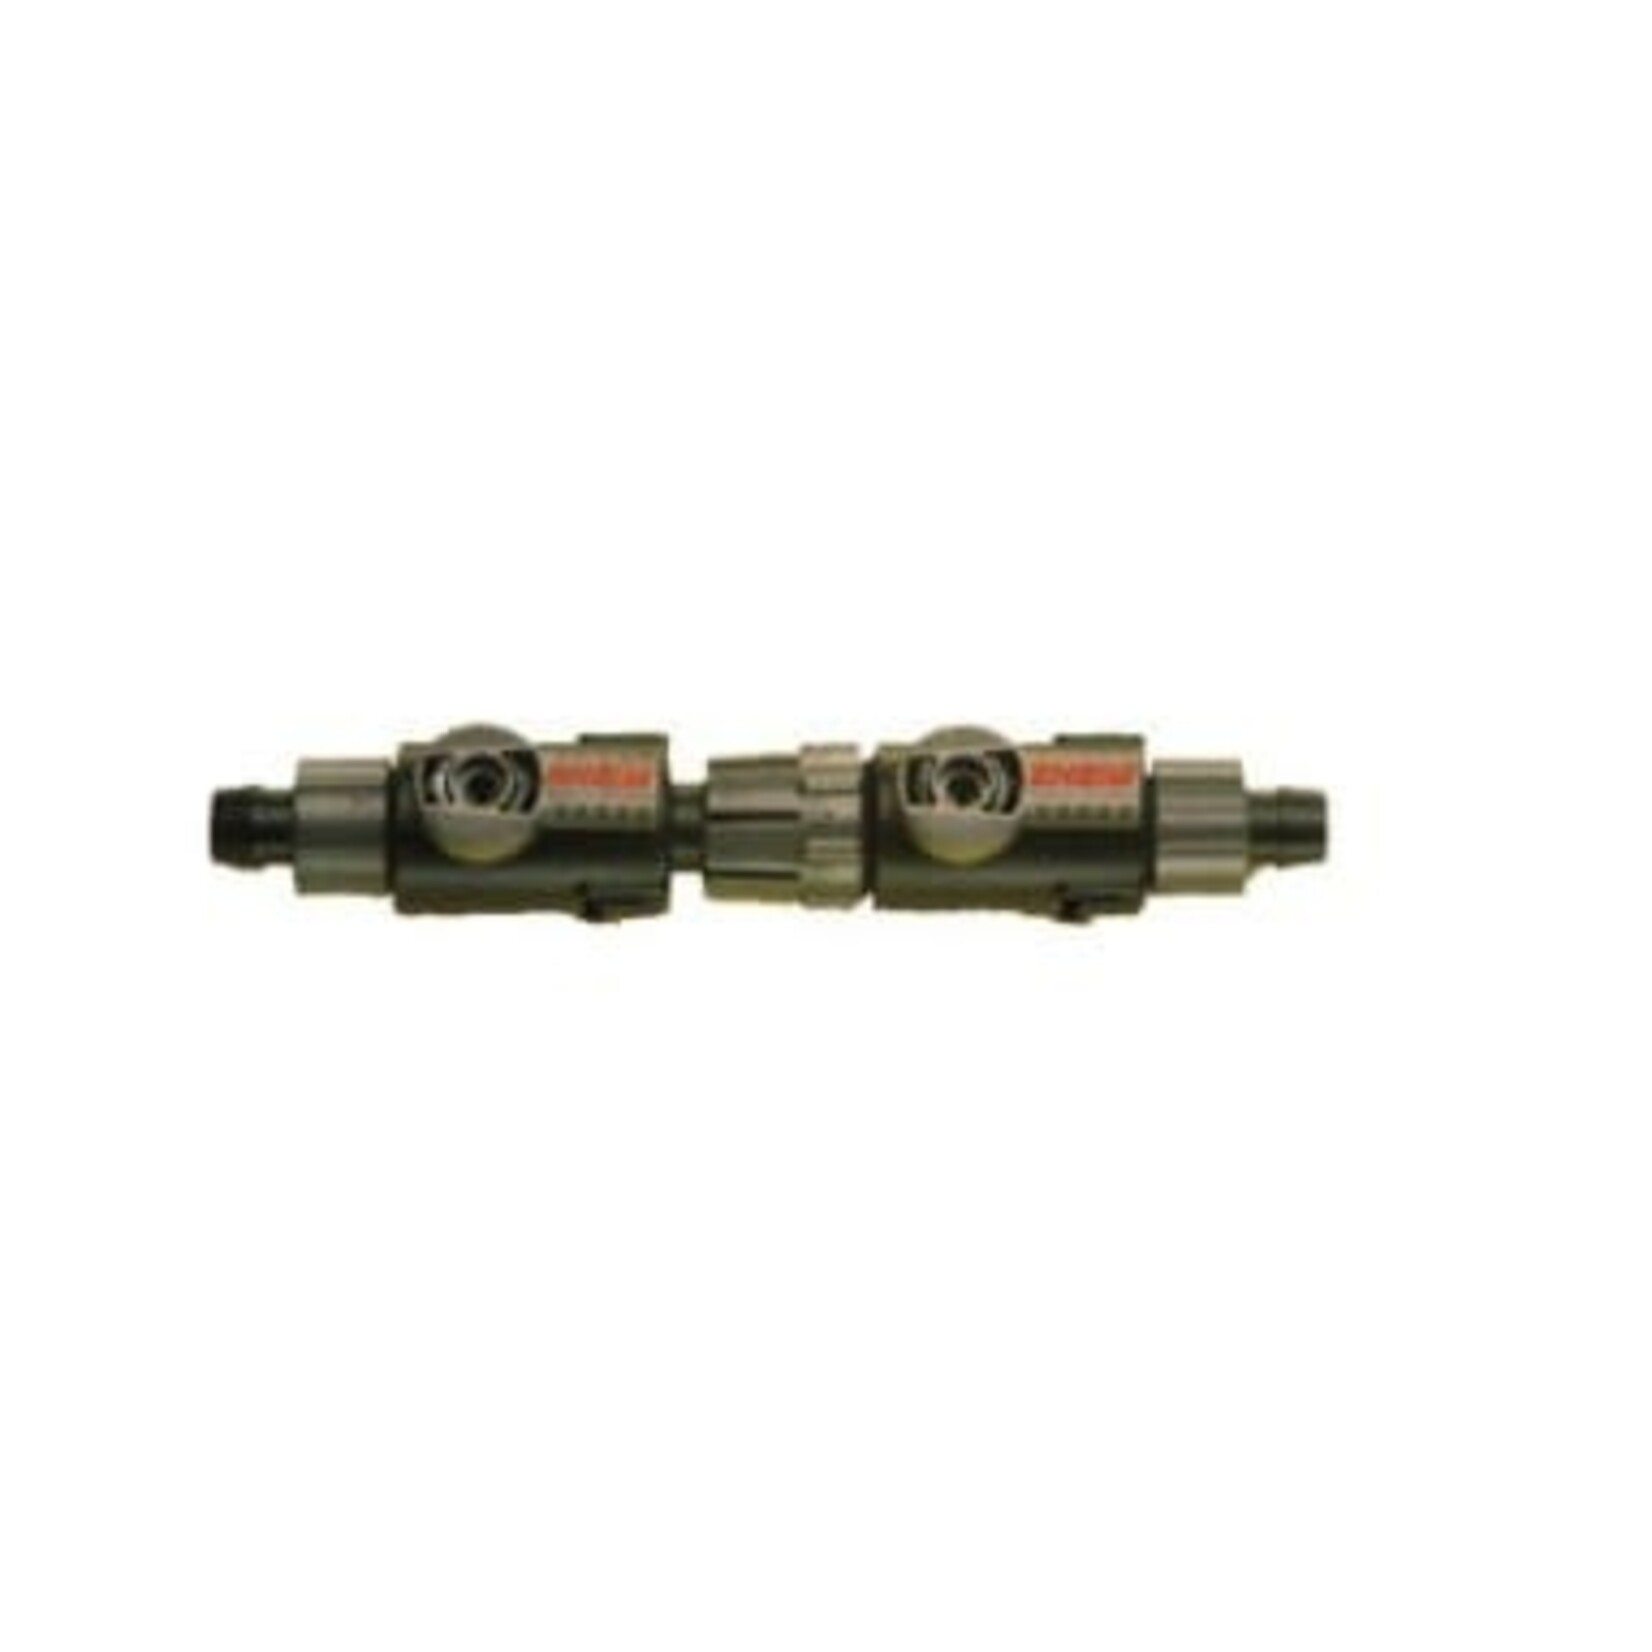 Eheim 2 taps with quick coupling for hose 9-12